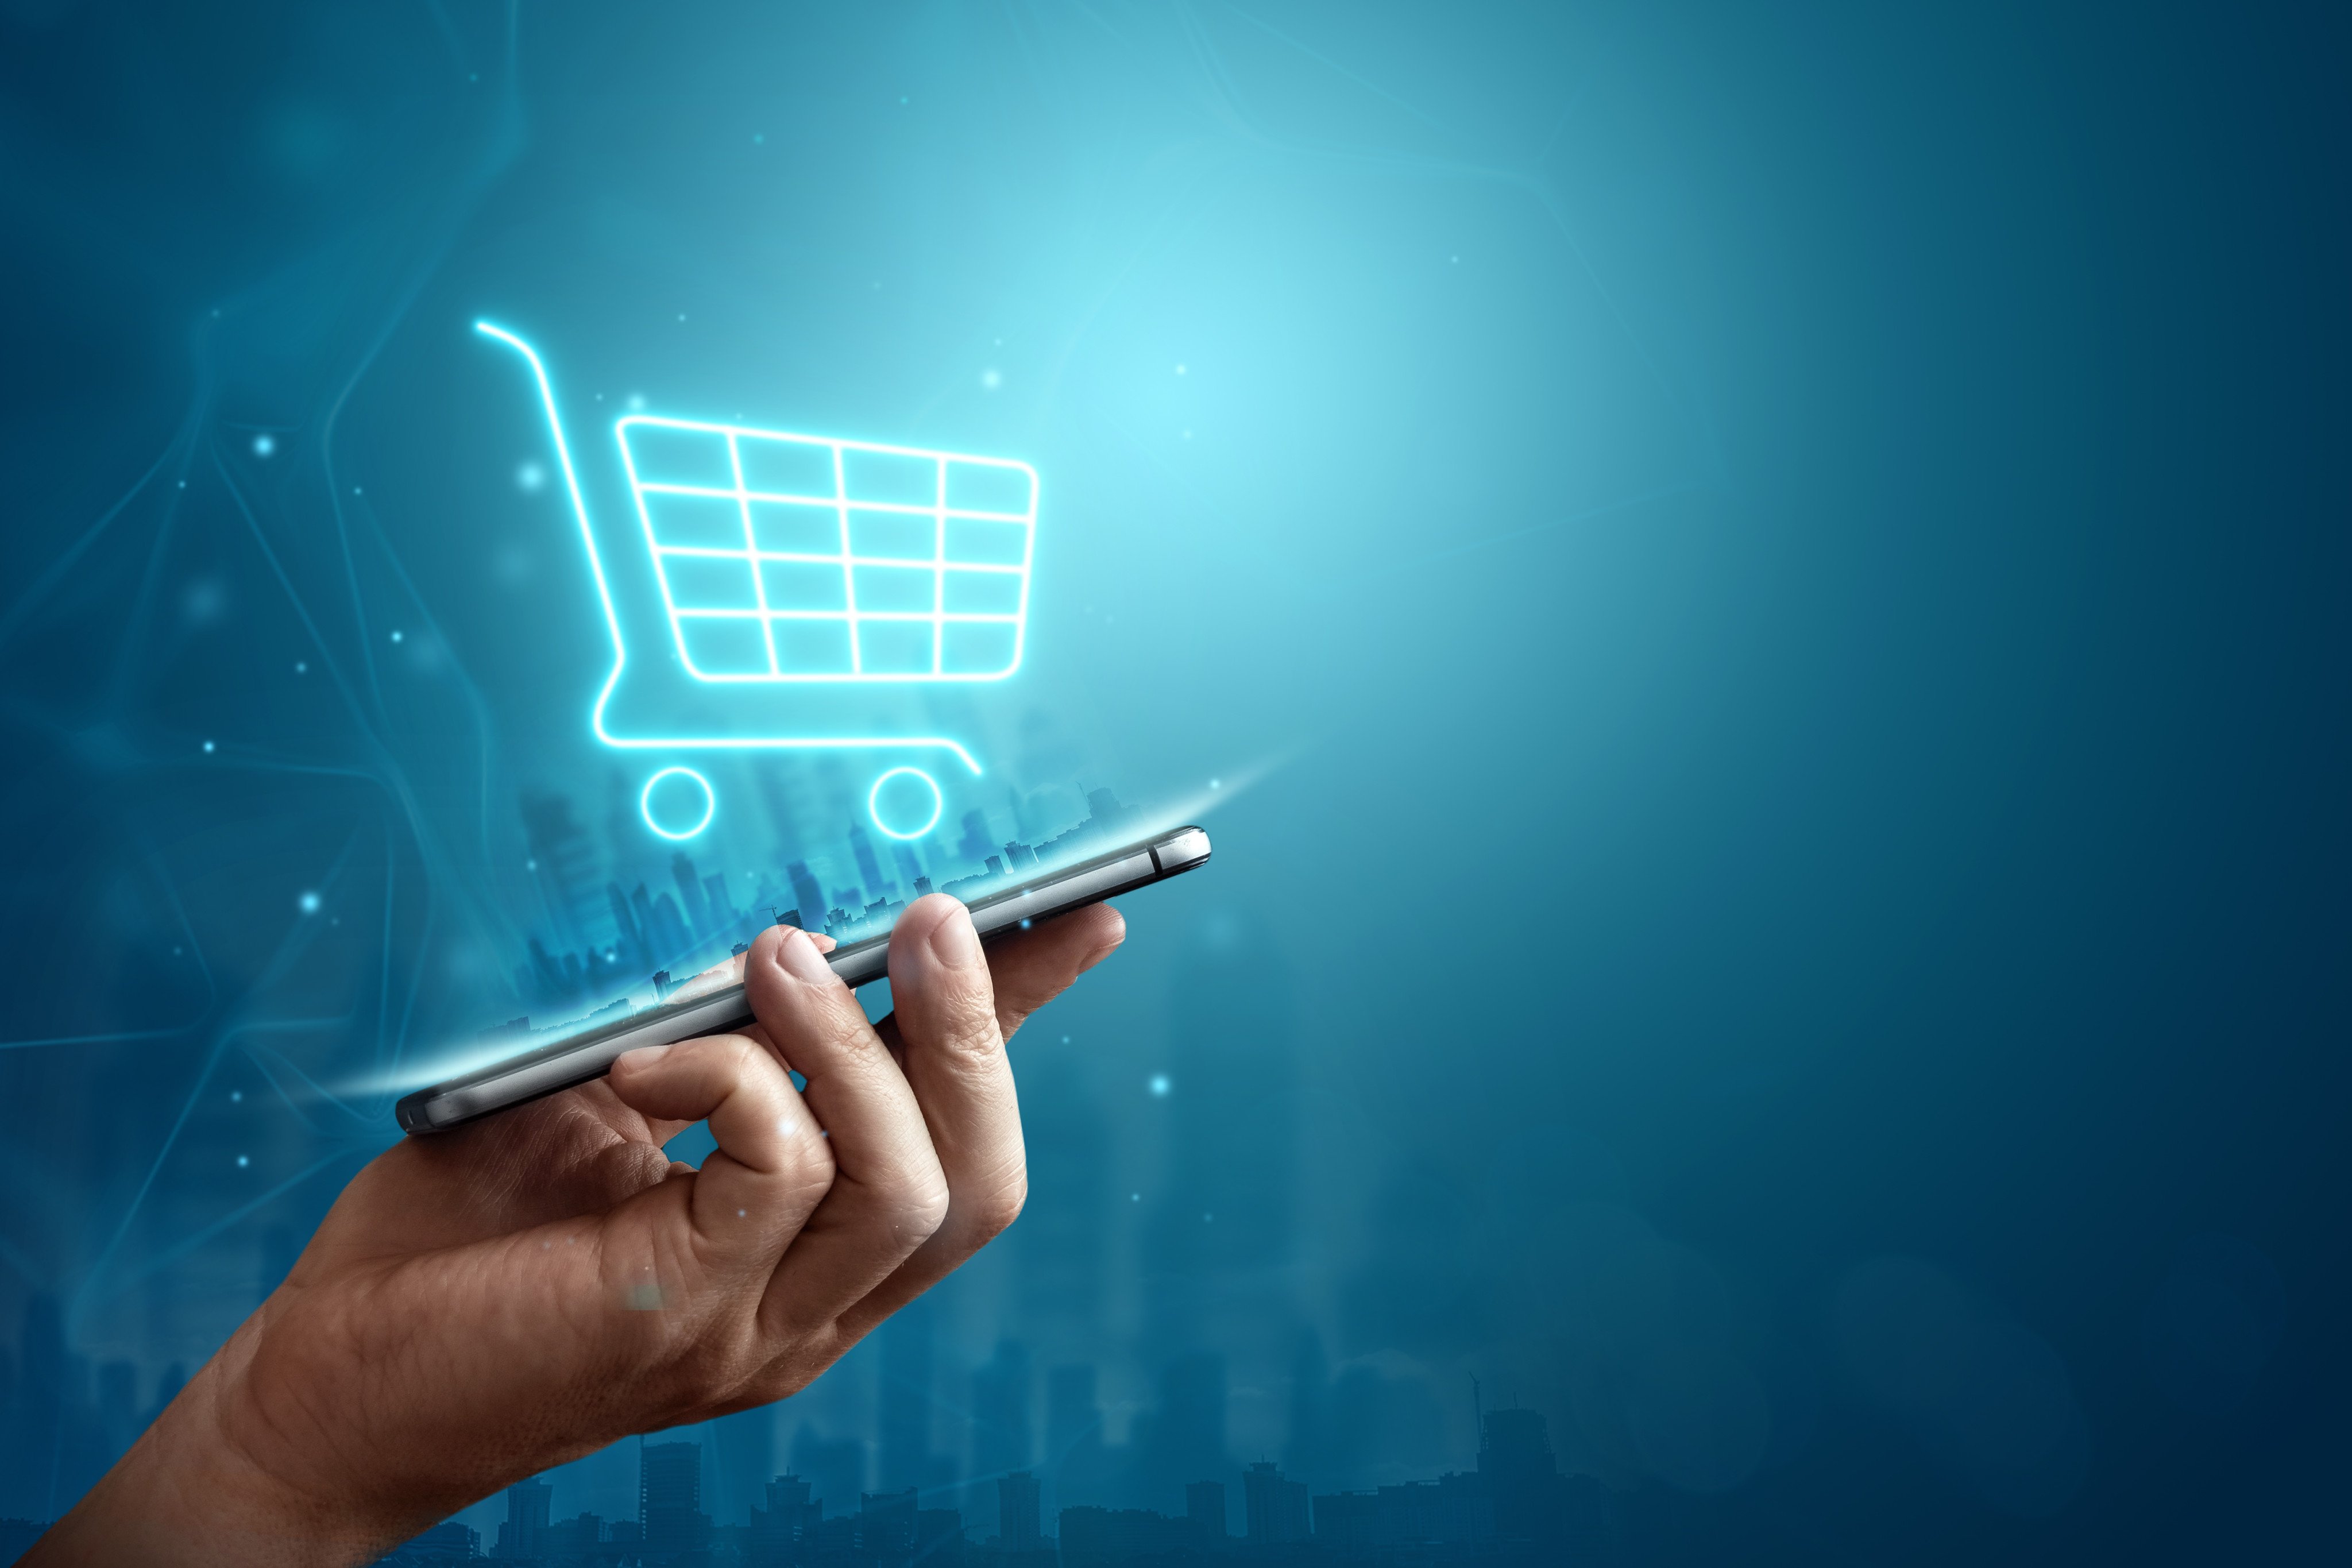 China was the largest market for e-commerce in 2021, generating US$1.5 trillion in revenue and placing it ahead of the United States, according to research firm eMarketer. Photo: Shutterstock 